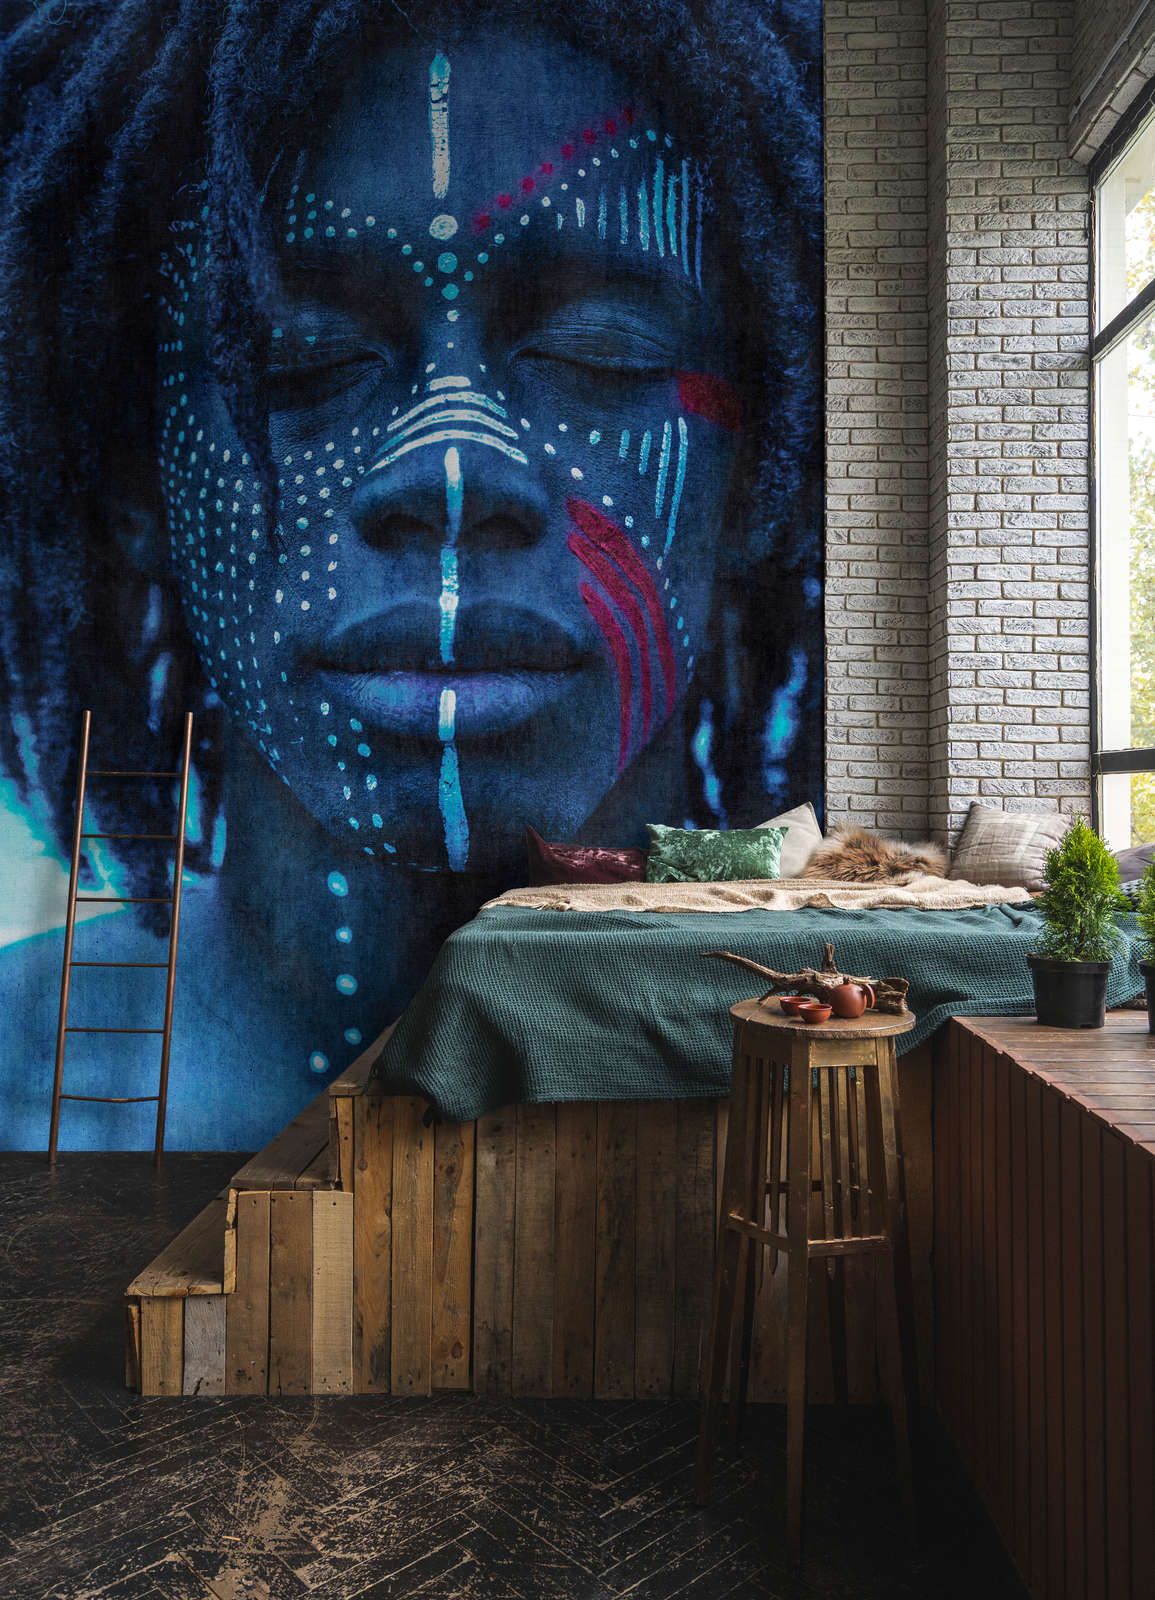             Photo wallpaper »mikala« - African portrait blue with tapestry structure - Smooth, slightly pearly shimmering non-woven fabric
        